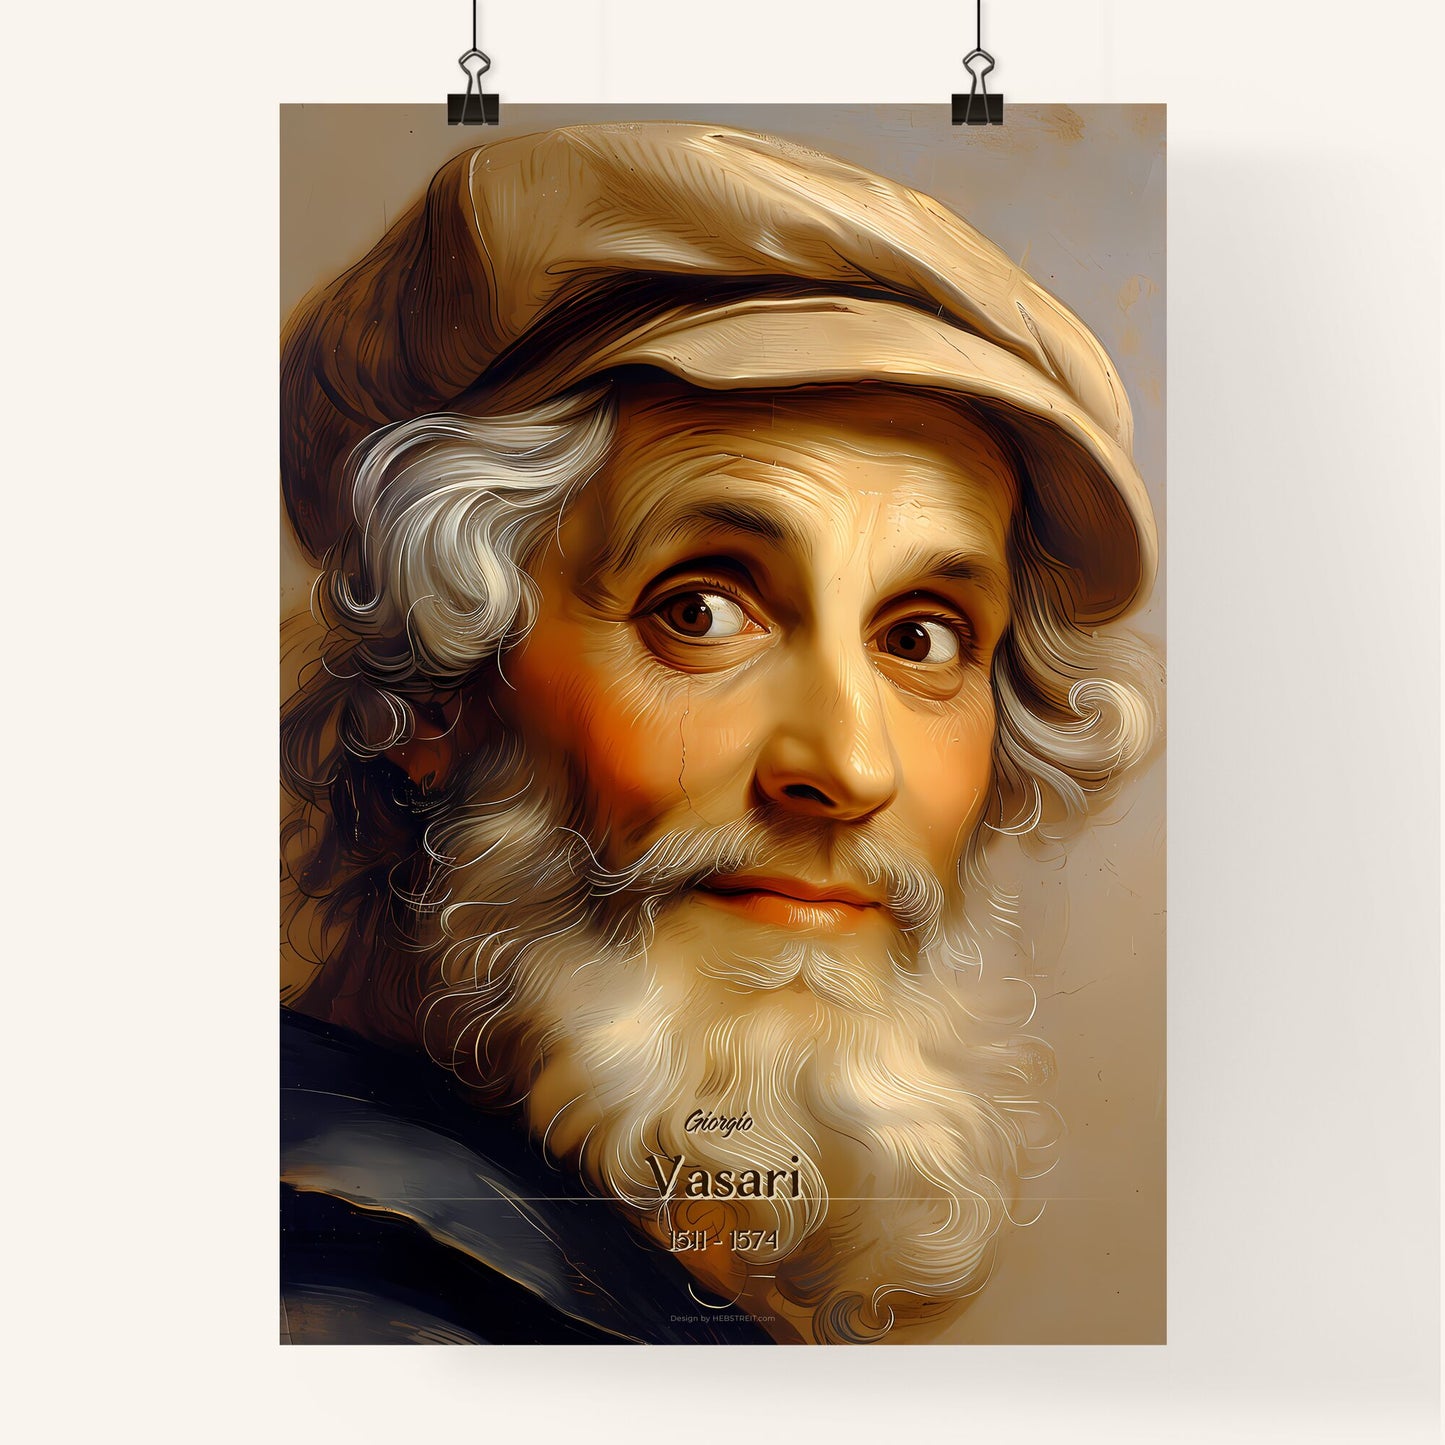 Giorgio, Vasari, 1511 - 1574, A Poster of a painting of a man with a hat Default Title